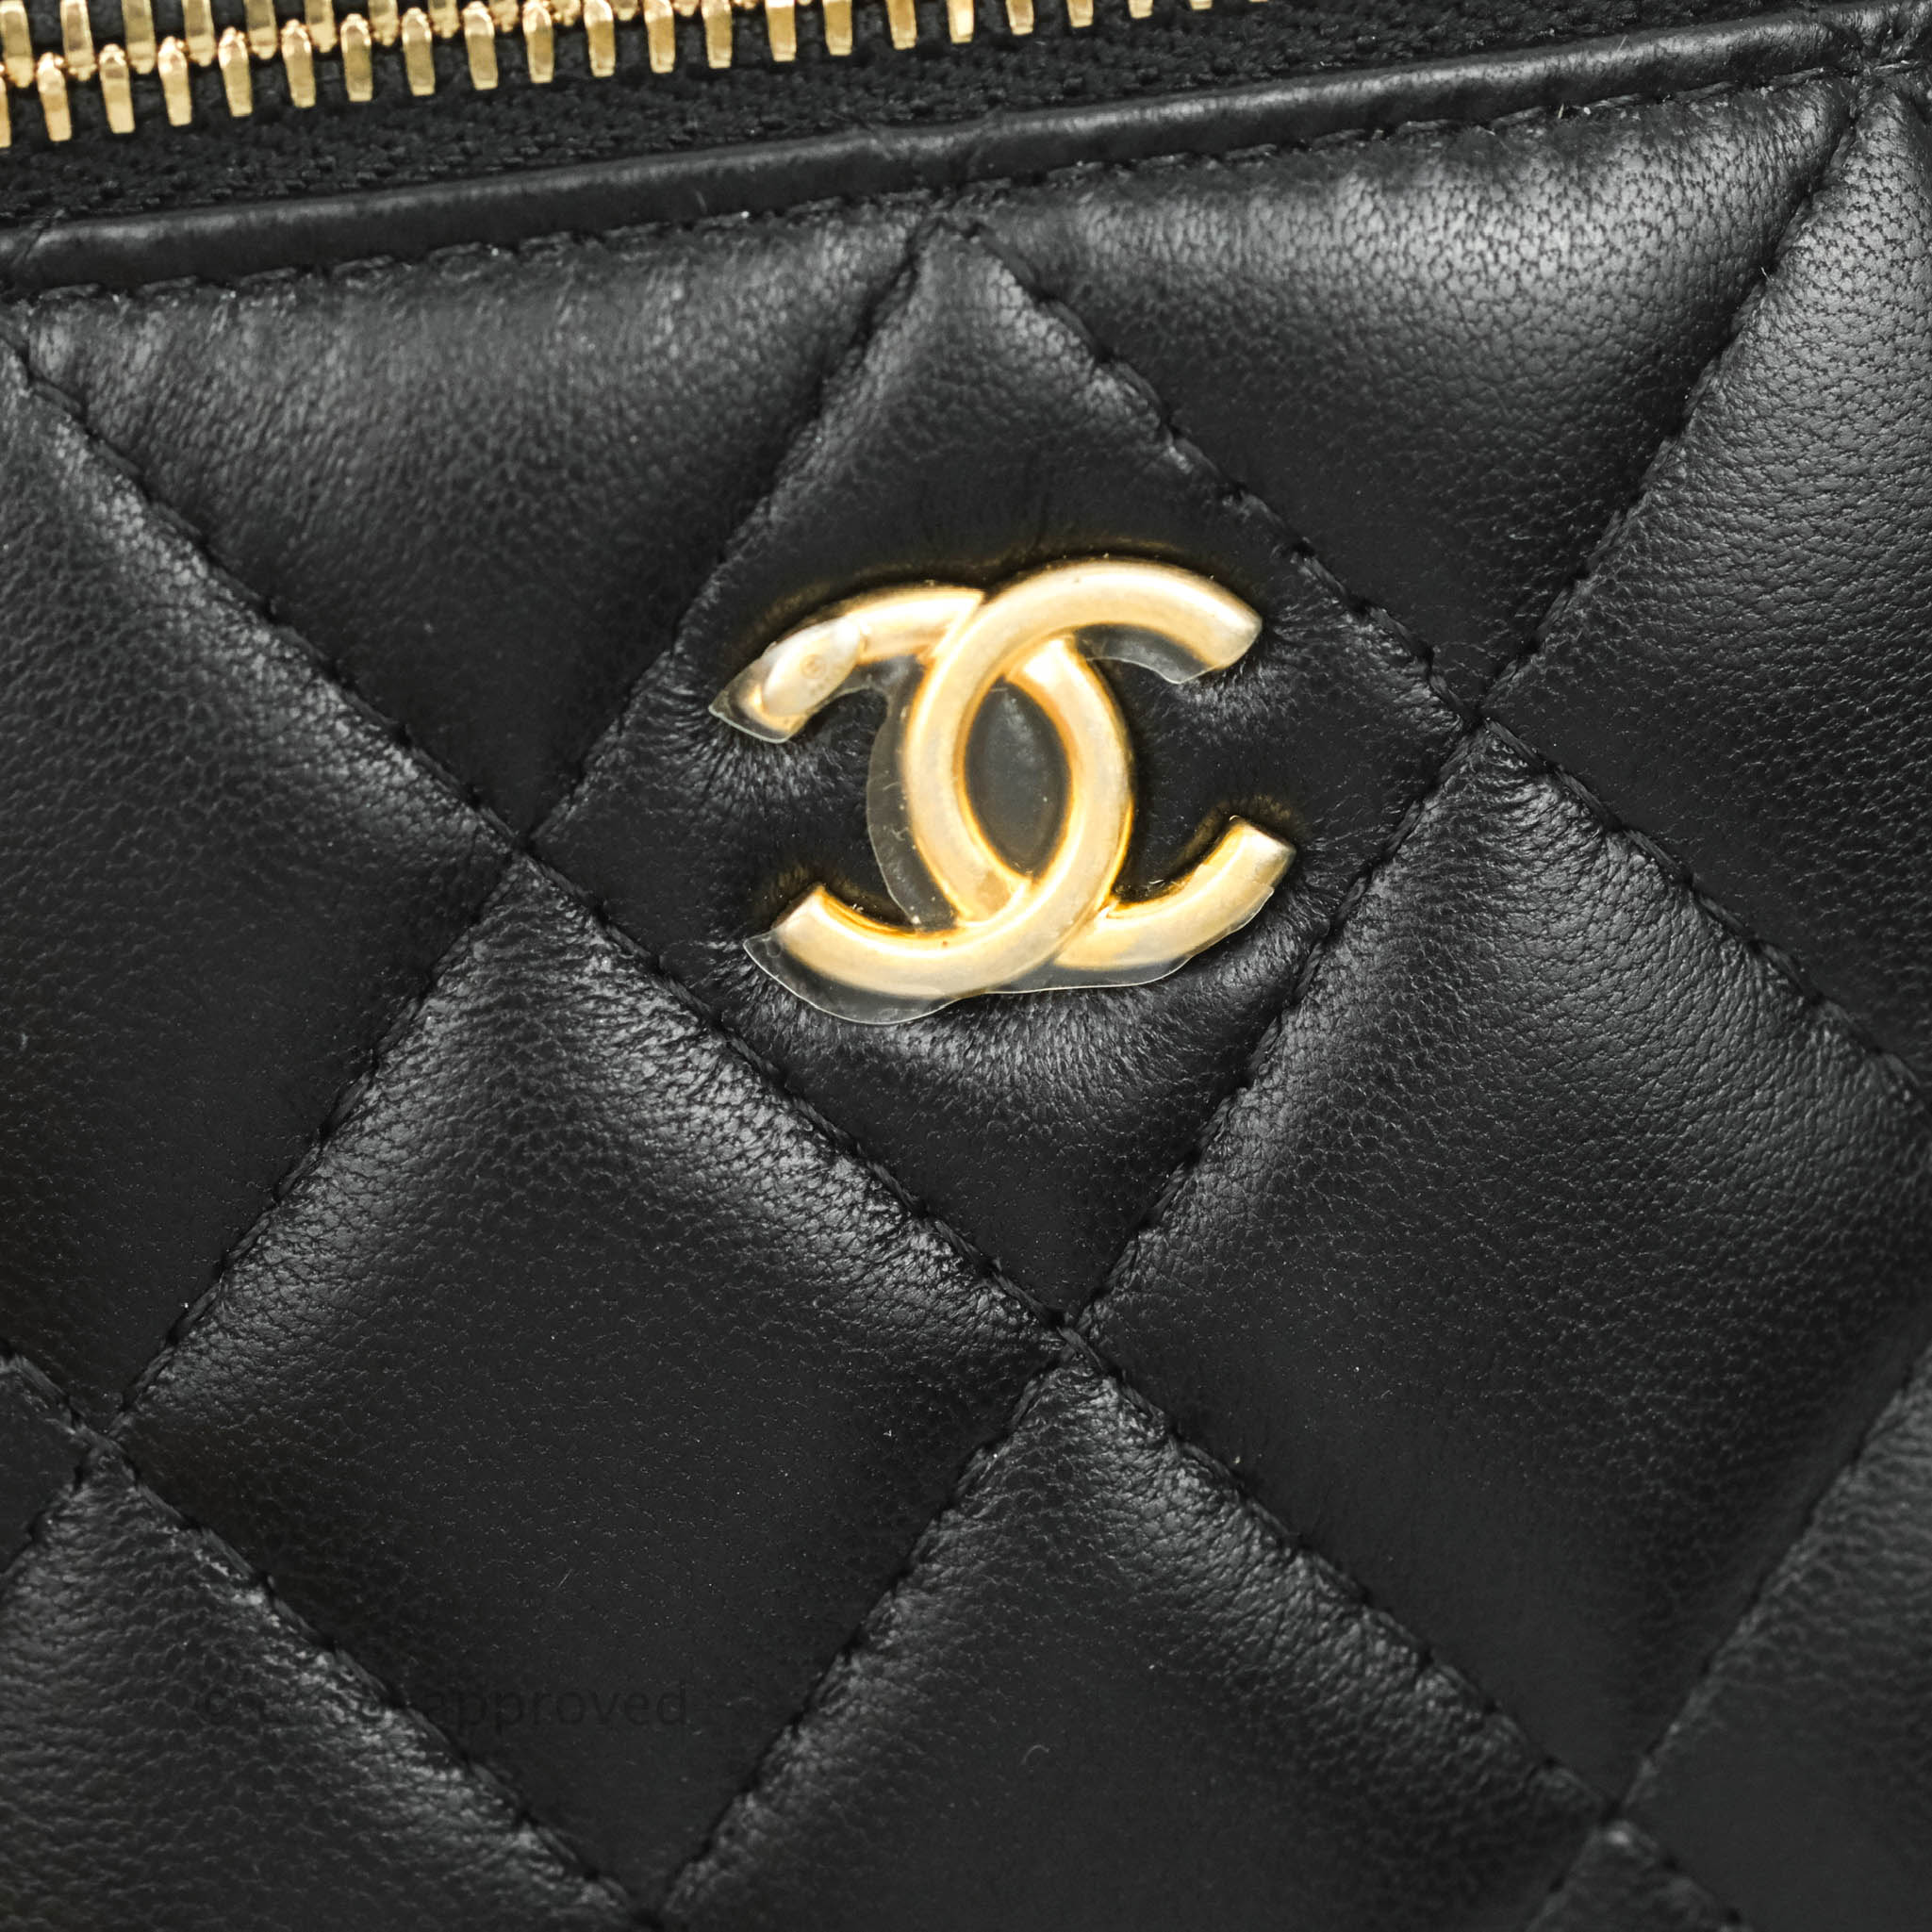 Chanel Black Quilted Lambskin CC Crown Flap Aged Gold Hardware